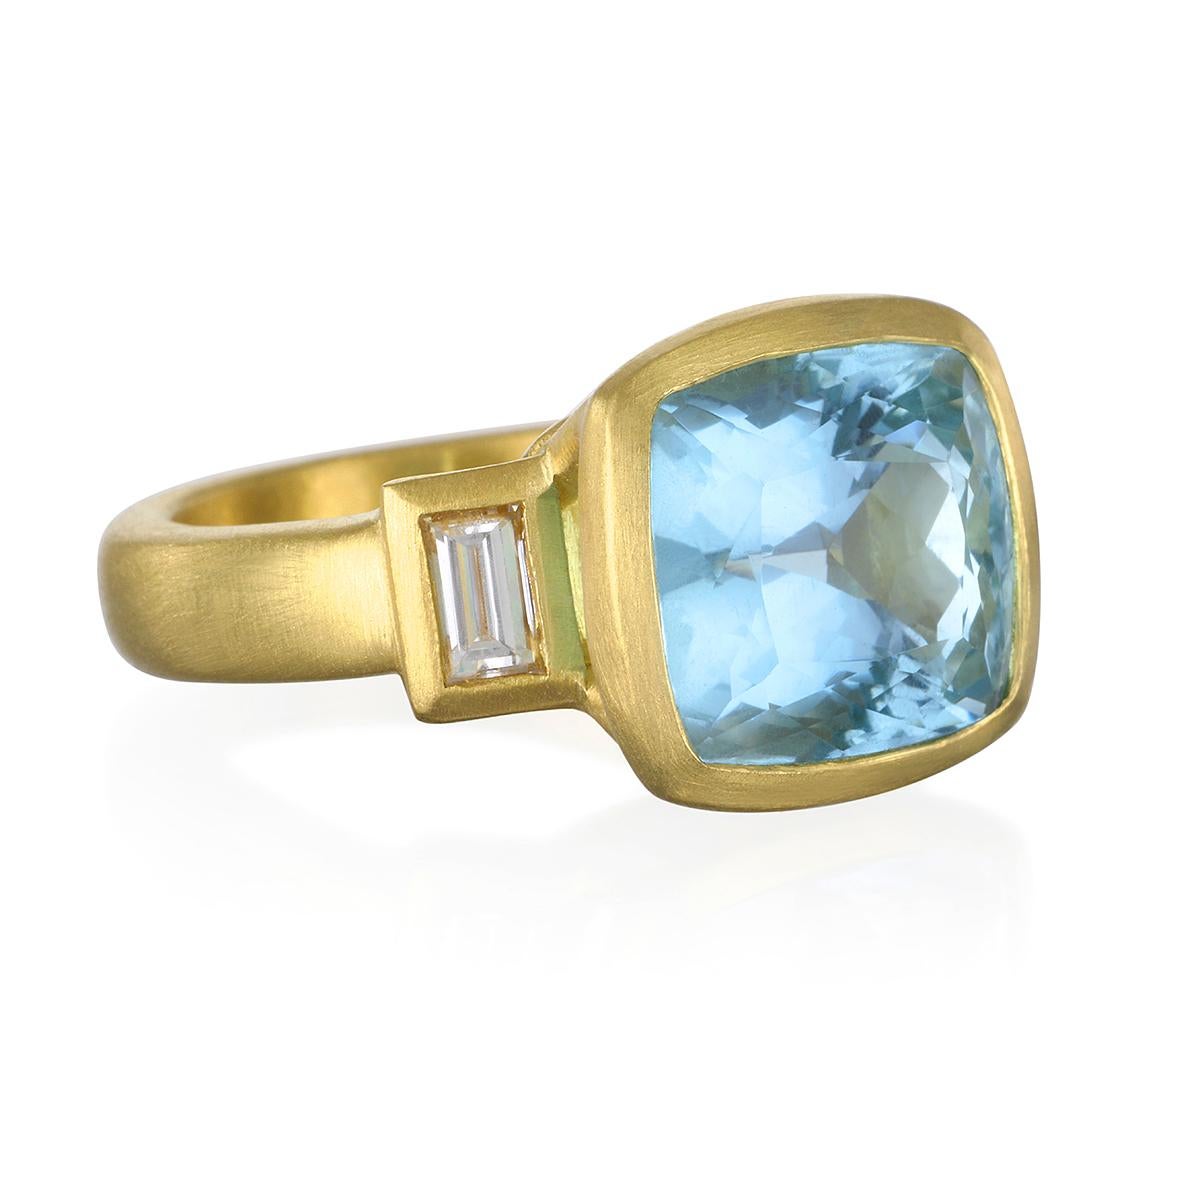 Classic Beauty!
Faye Kim's  18K Gold Aquamarine and Diamond Three Stone Ring is the modern-day cocktail ring that can be worn casually or dressy.
Slightly oversized for impact but with sophisticated subtlety,  the combination of the soft blue